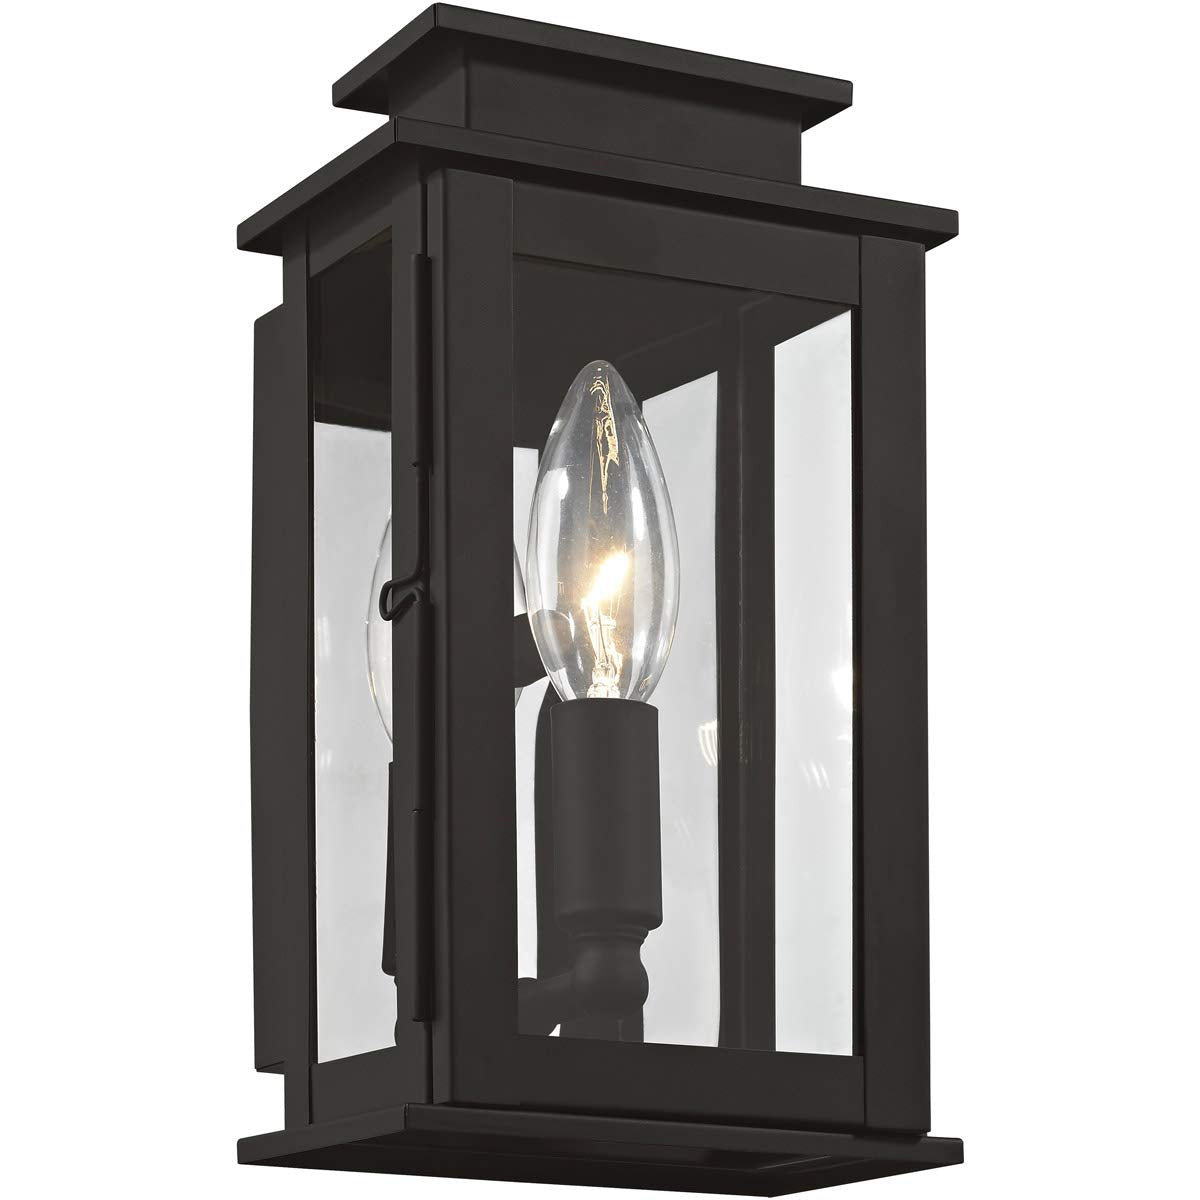 Livex Lighting 20191-04 Transitional One Light Outdoor Wall Lantern from Princeton Collection in Black Finish